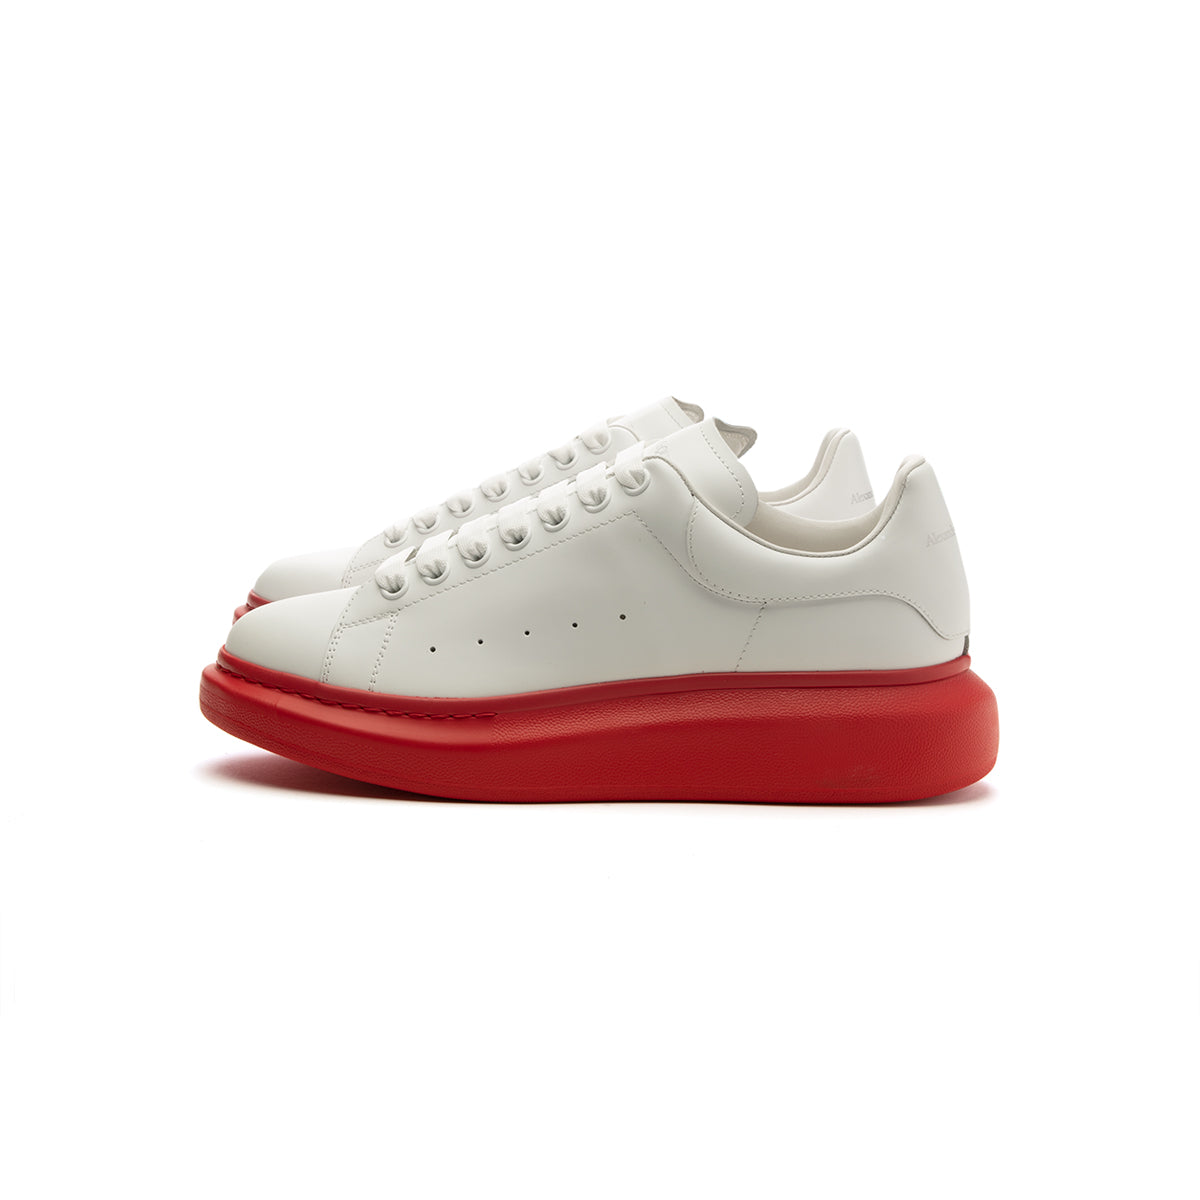 red and white alexander mcqueen